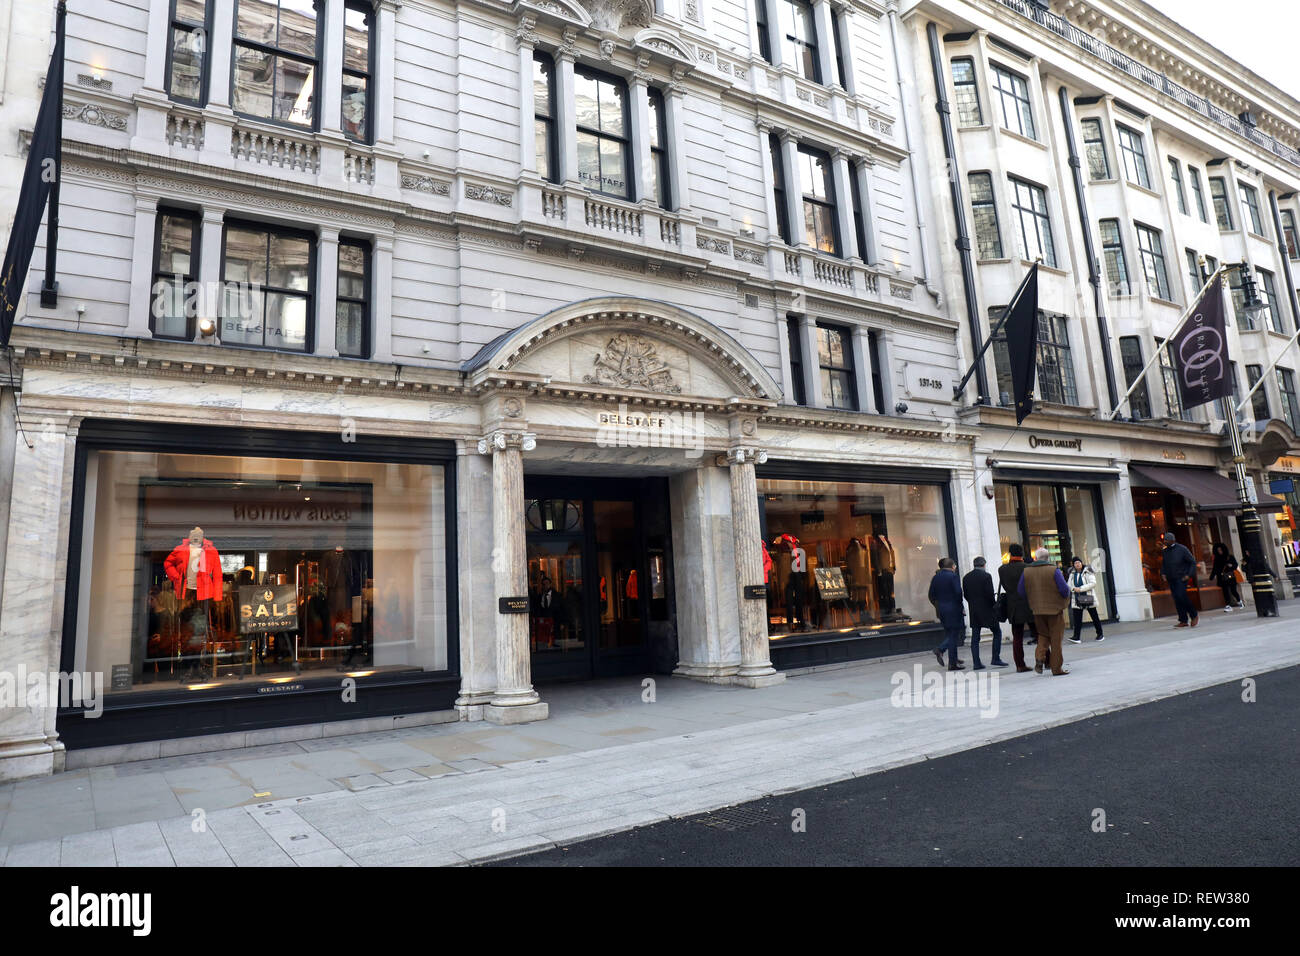 Belstaff bond street hi-res stock photography and images - Alamy